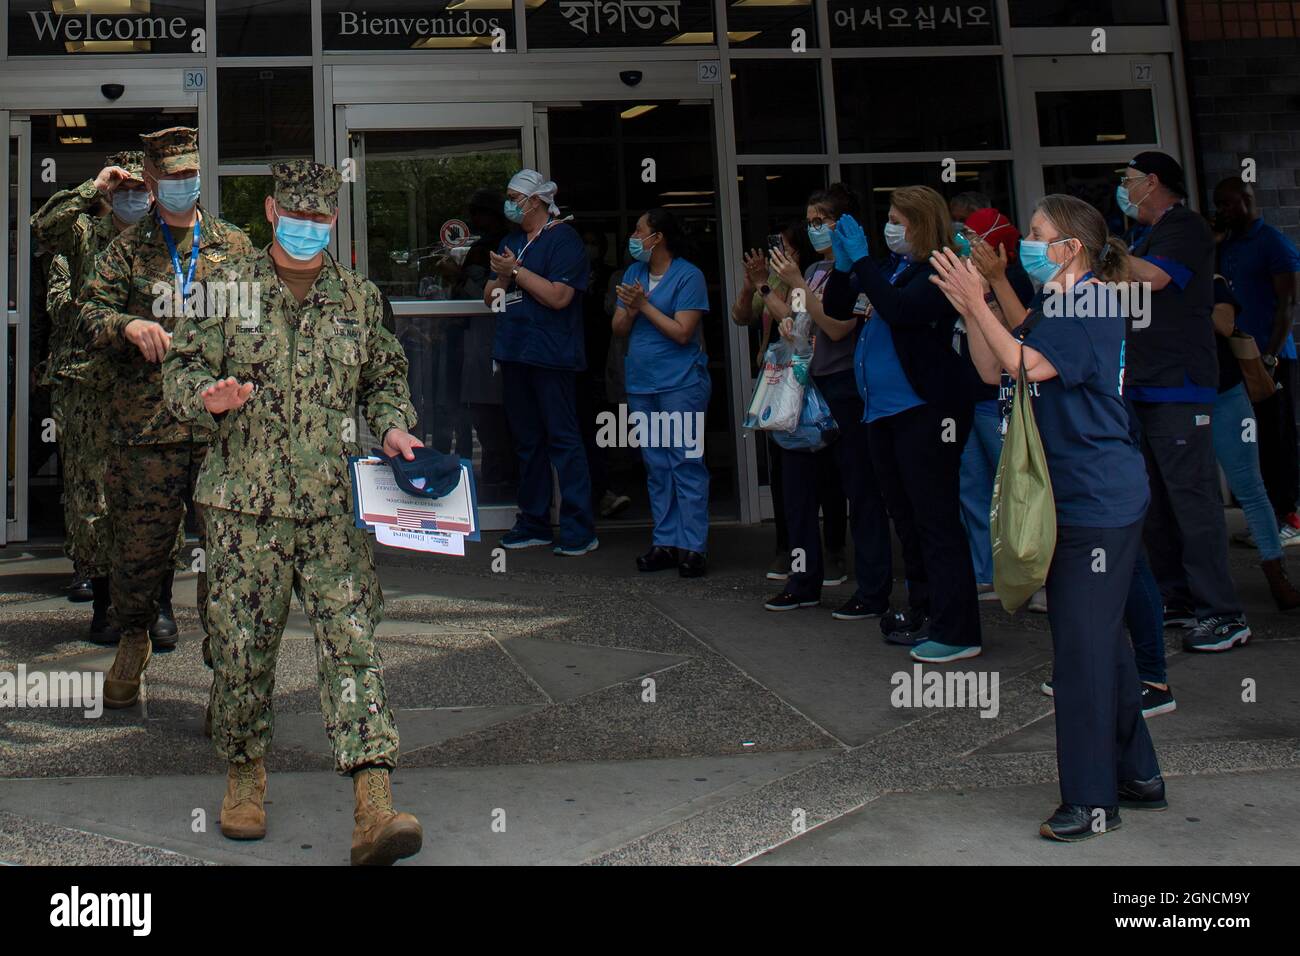 NEW YORK (June 3, 2020) Sailors assigned to the Navy Medicine Support Team are thanked by medical staff during a farewell ceremony at Elmhurst Medical Center, in Brooklyn, N.Y., June 3, 2020. Military medical providers assigned to the hospital collaborate as an integrated system in support of the New York City medical system, as part of the Department of Defense COVID-19 response. U.S. Northern Command, through U.S. Army North, remains committed to providing flexible Department of Defense support to the Federal Emergency Management Agency for the whole-of-nation COVID-19 response. (U.S. Navy p Stock Photo